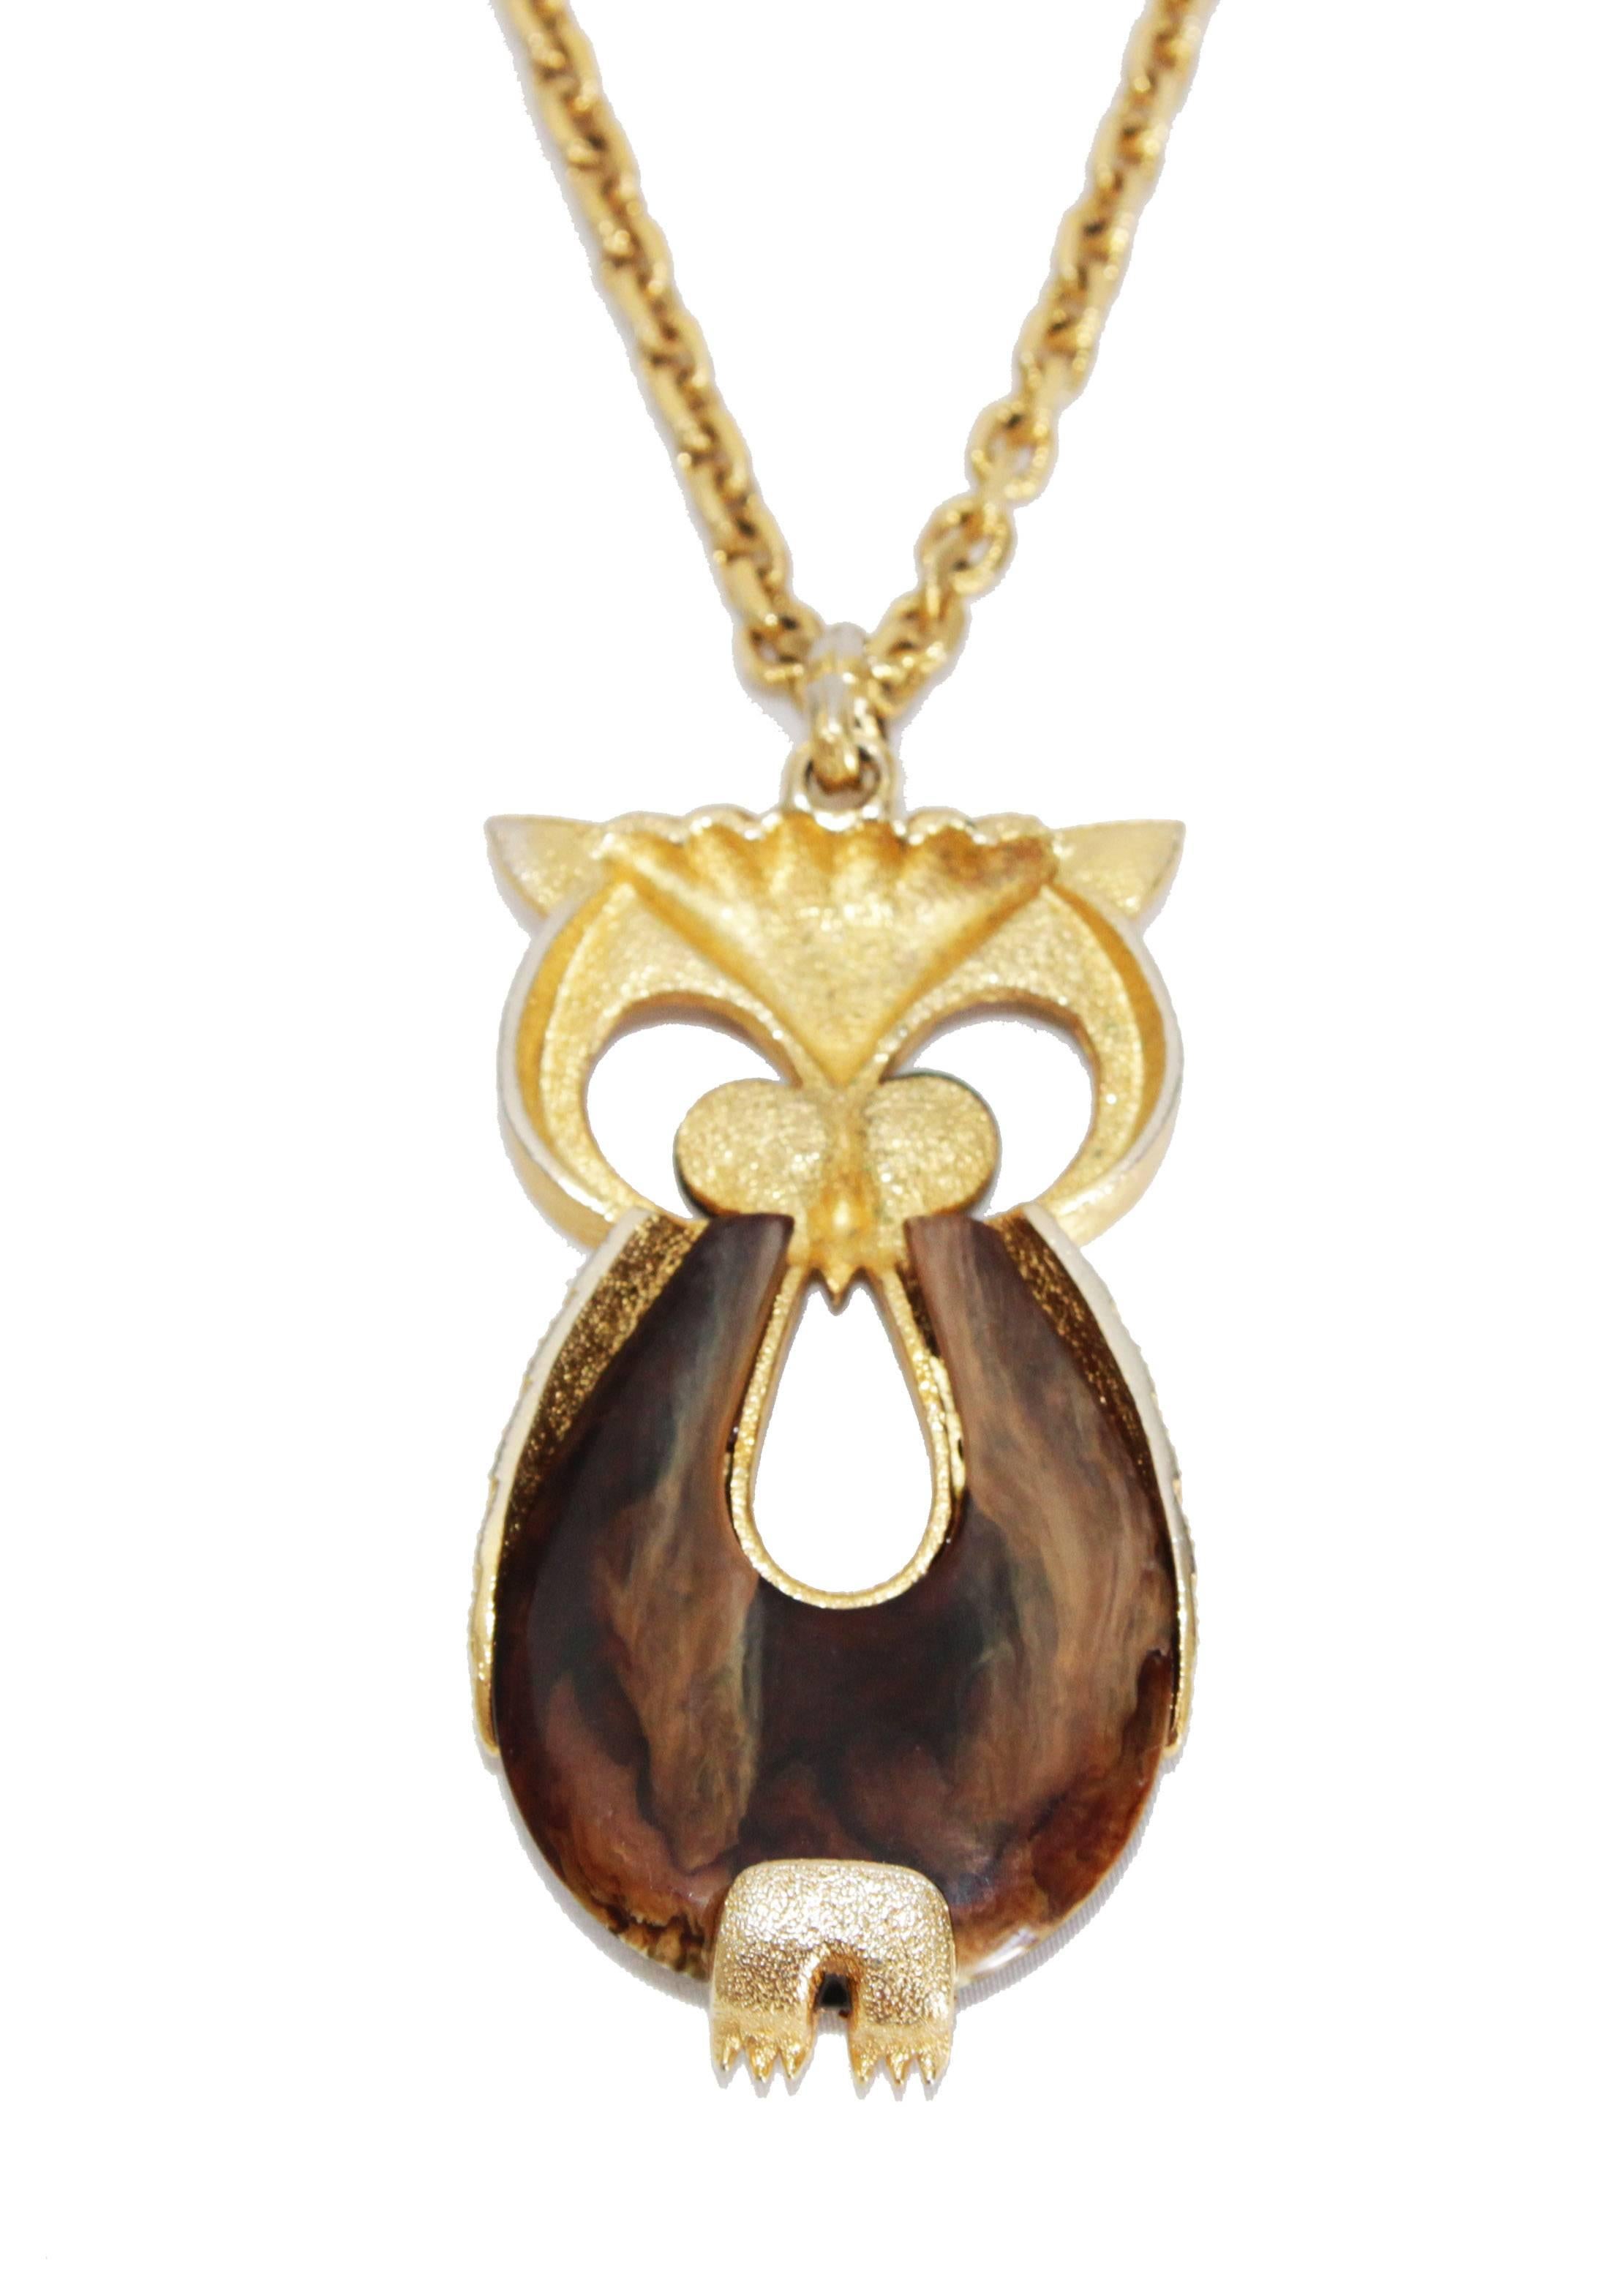 Funny owl necklace of the 70s. Made of gilt metal & amber glass. 

Size : Length : 60 cm - 23.6 in. Pendant : 8 x 4 cm - 3 x 1.6 in.

Excellent vintage condition. 